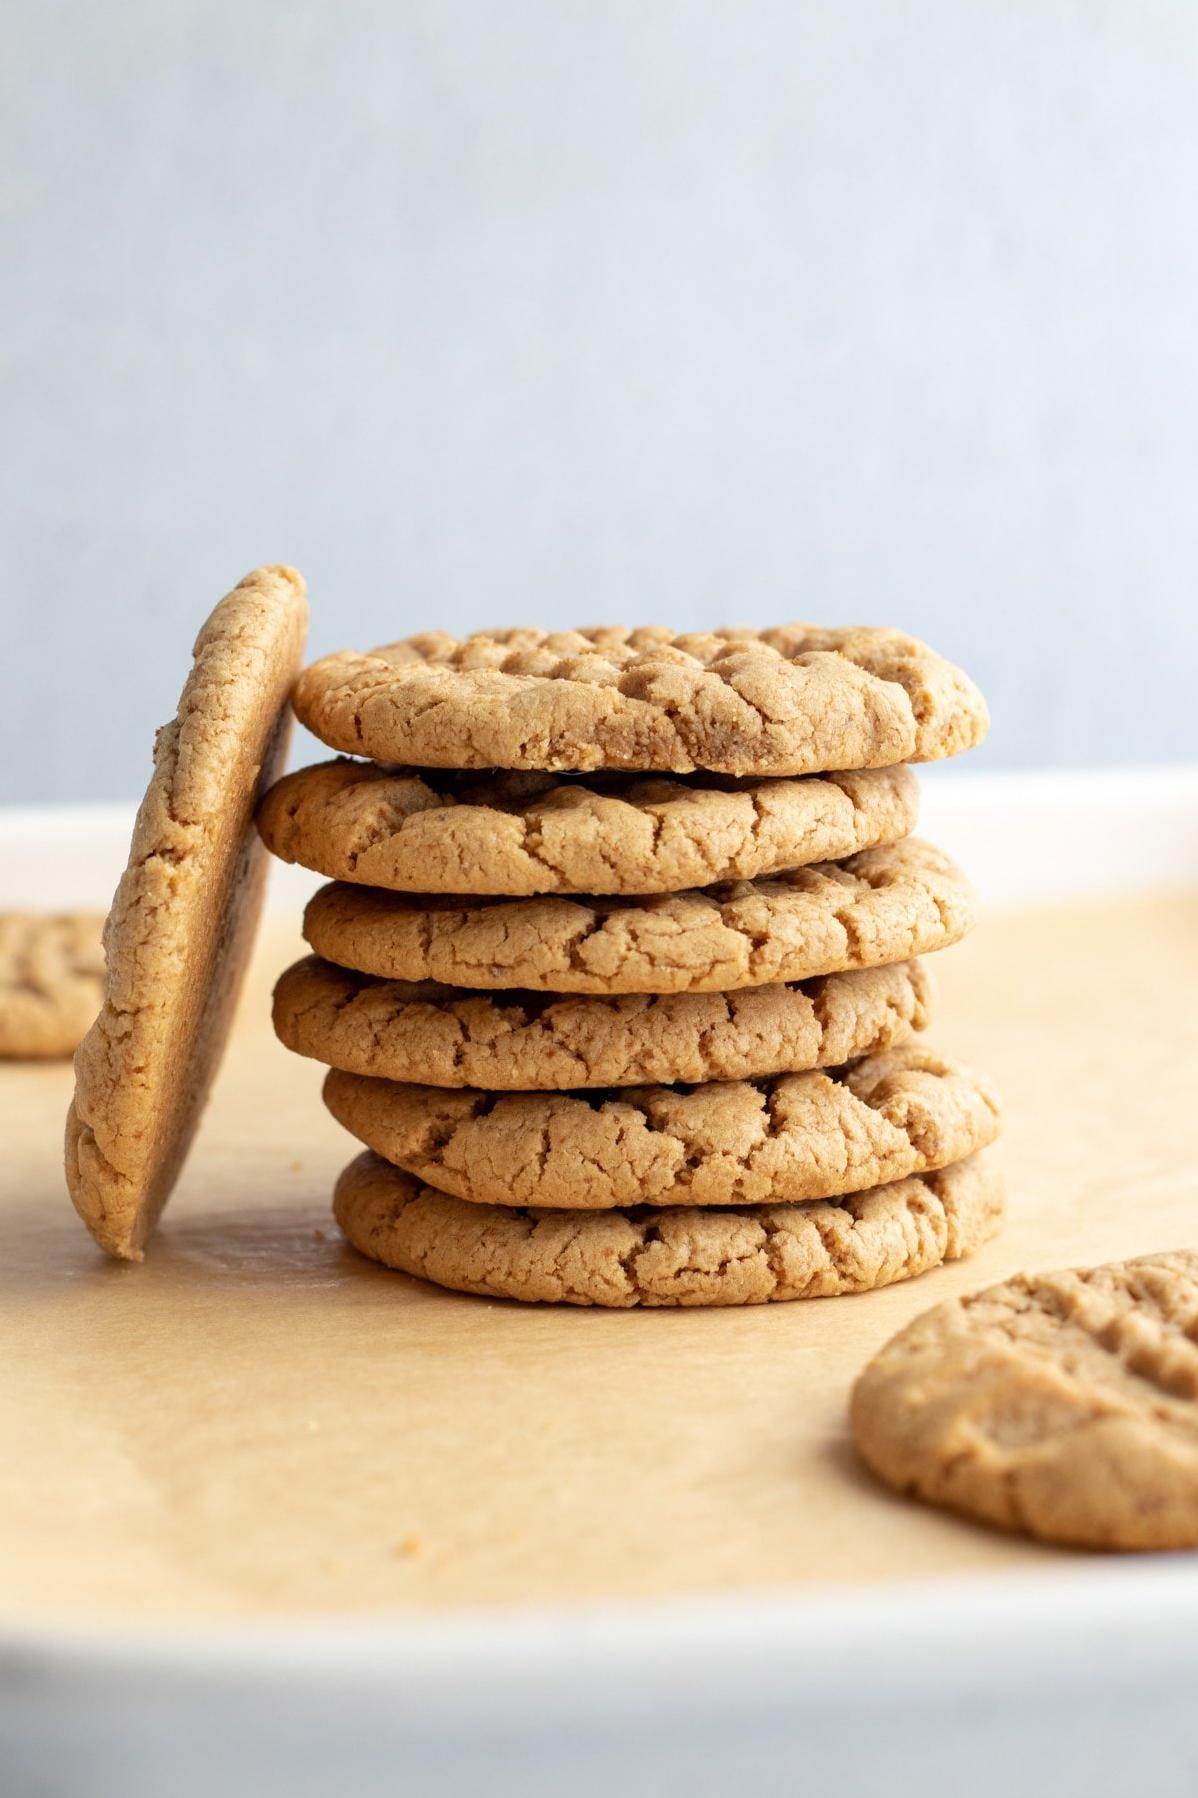  With just a few simple ingredients, you can bake a batch of these cookies in no time.